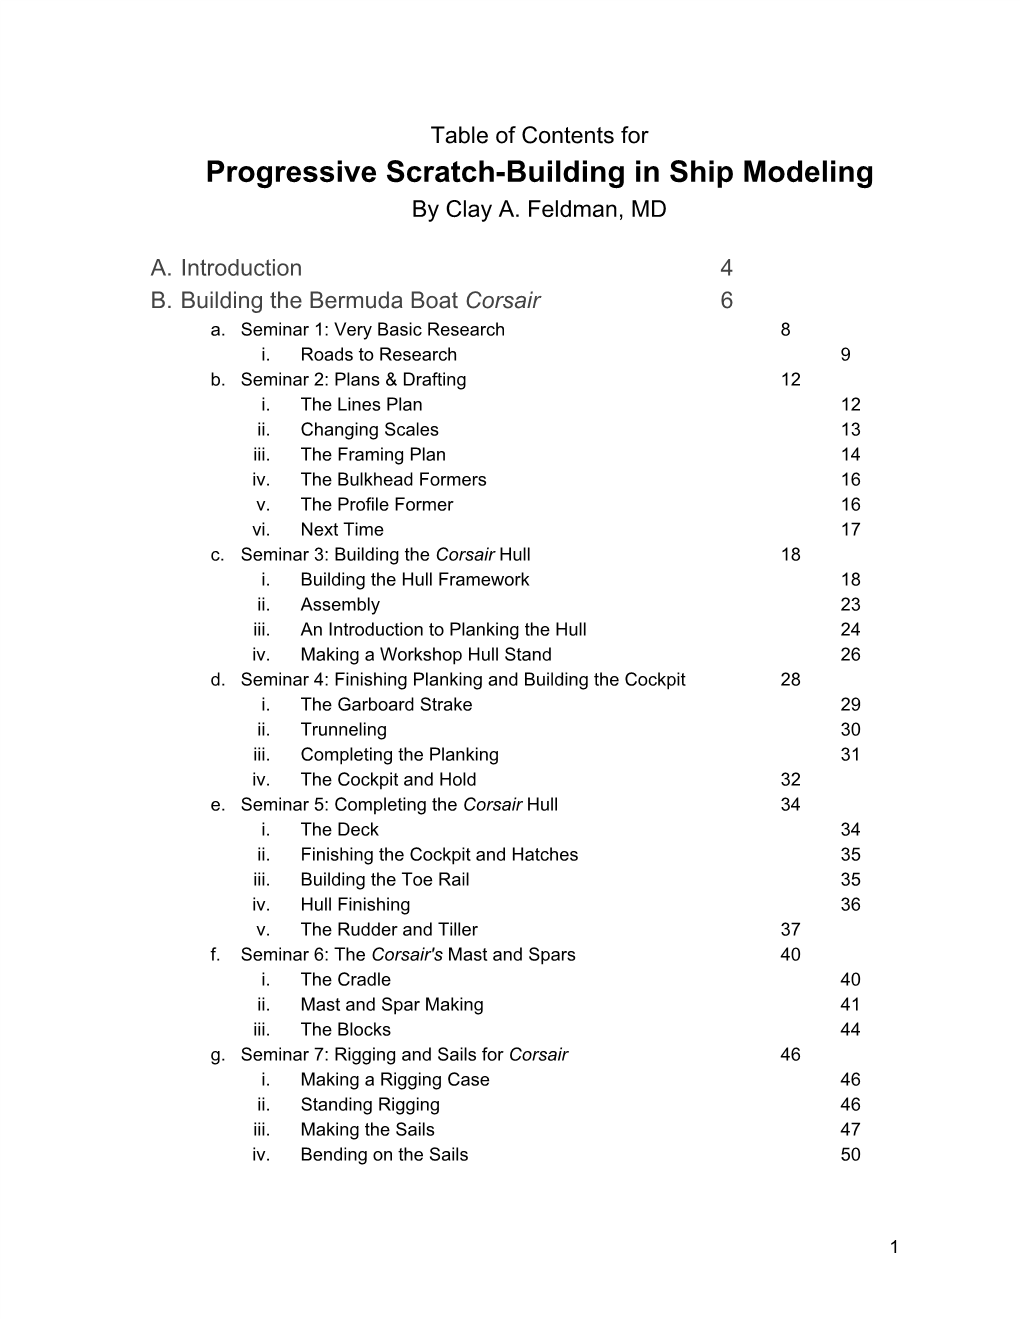 Progressive Scratch-Building in Ship Modeling by Clay A